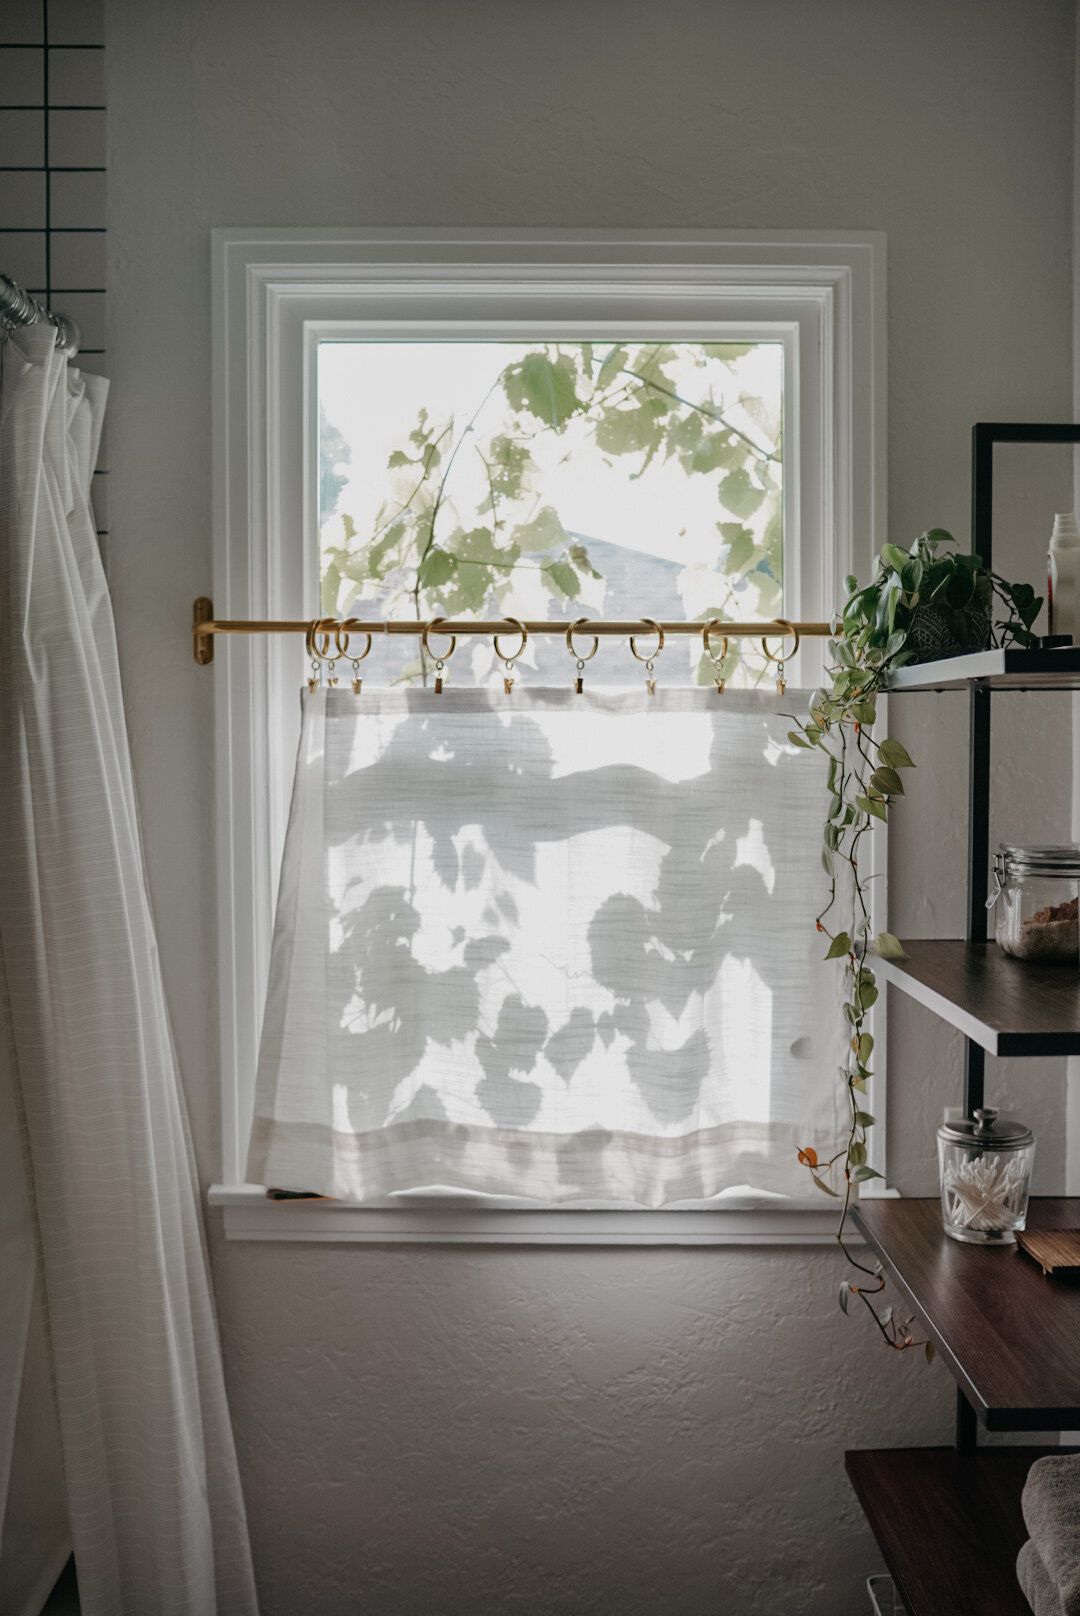 The Best Materials for Bathroom Window
Curtains